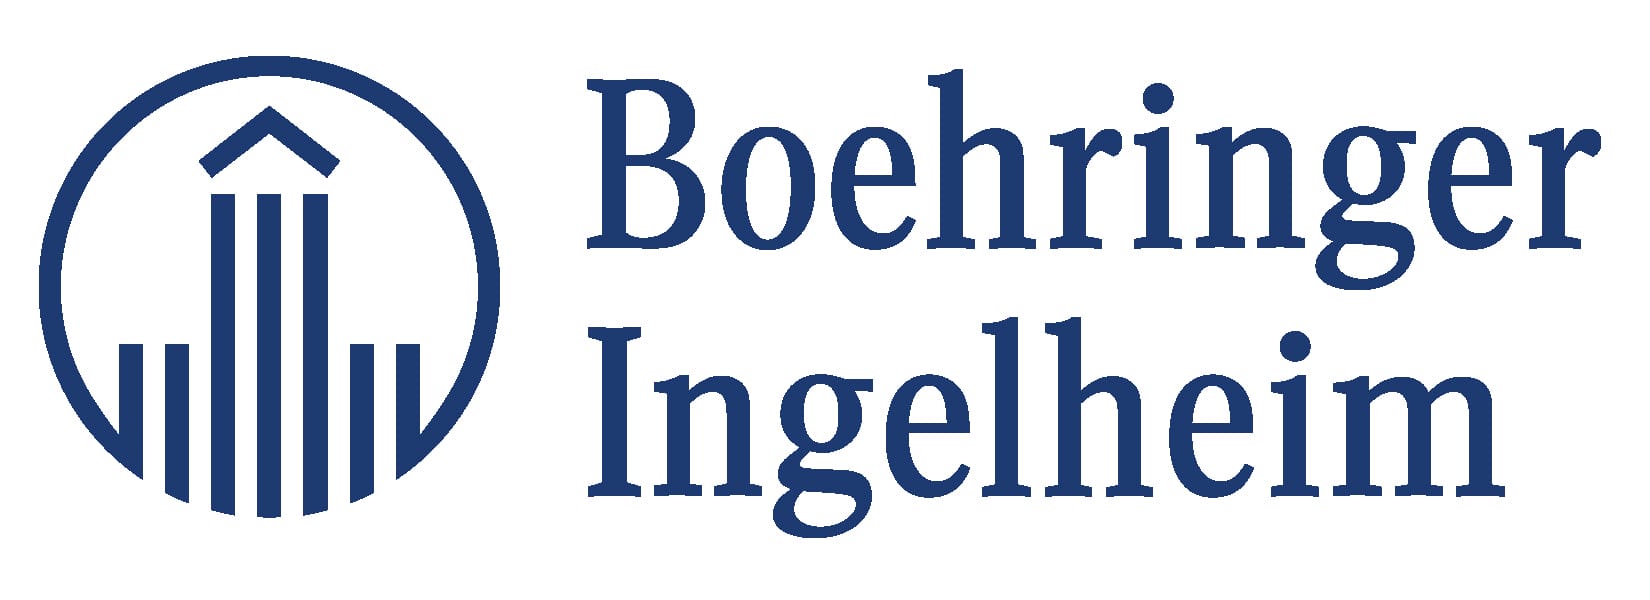 Logo of boehringer ingelheim featuring a stylized pillar design above the company name in blue text.